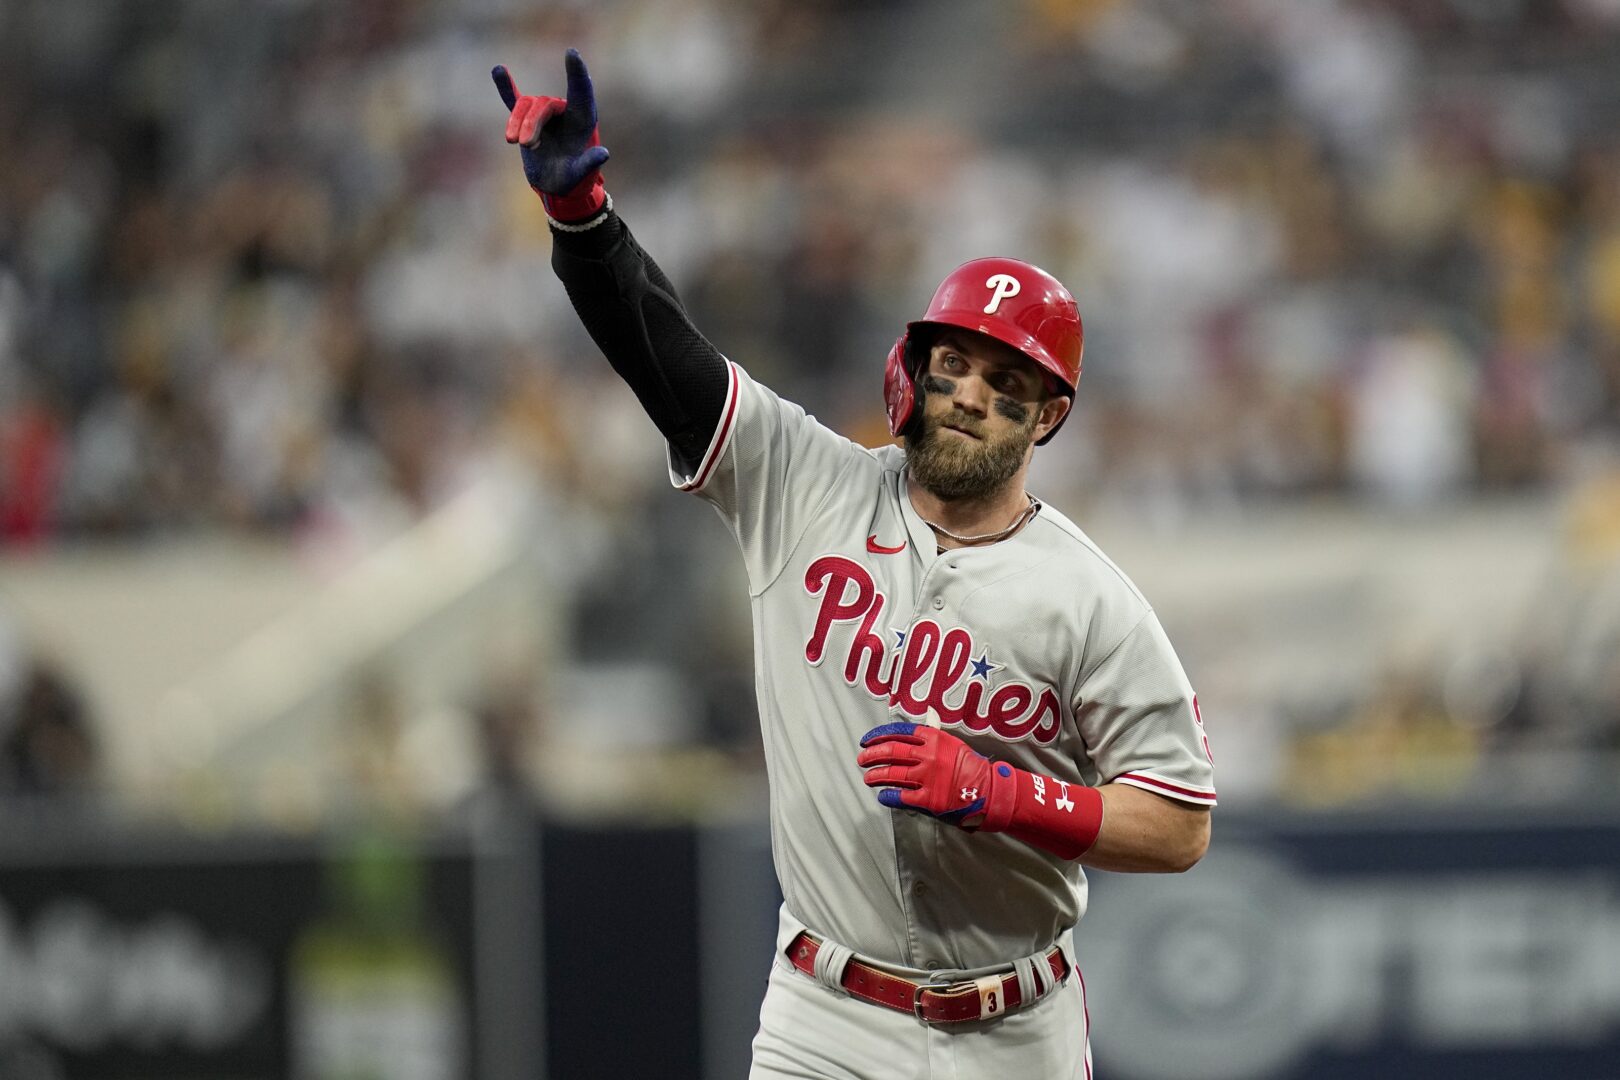 Philadelphia Phillies' Bryce Harper celebrates after a home run during the fourth inning in Game 1 of the baseball NL Championship Series between the San Diego Padres and the Philadelphia Phillies on Tuesday, Oct. 18, 2022, in San Diego. 